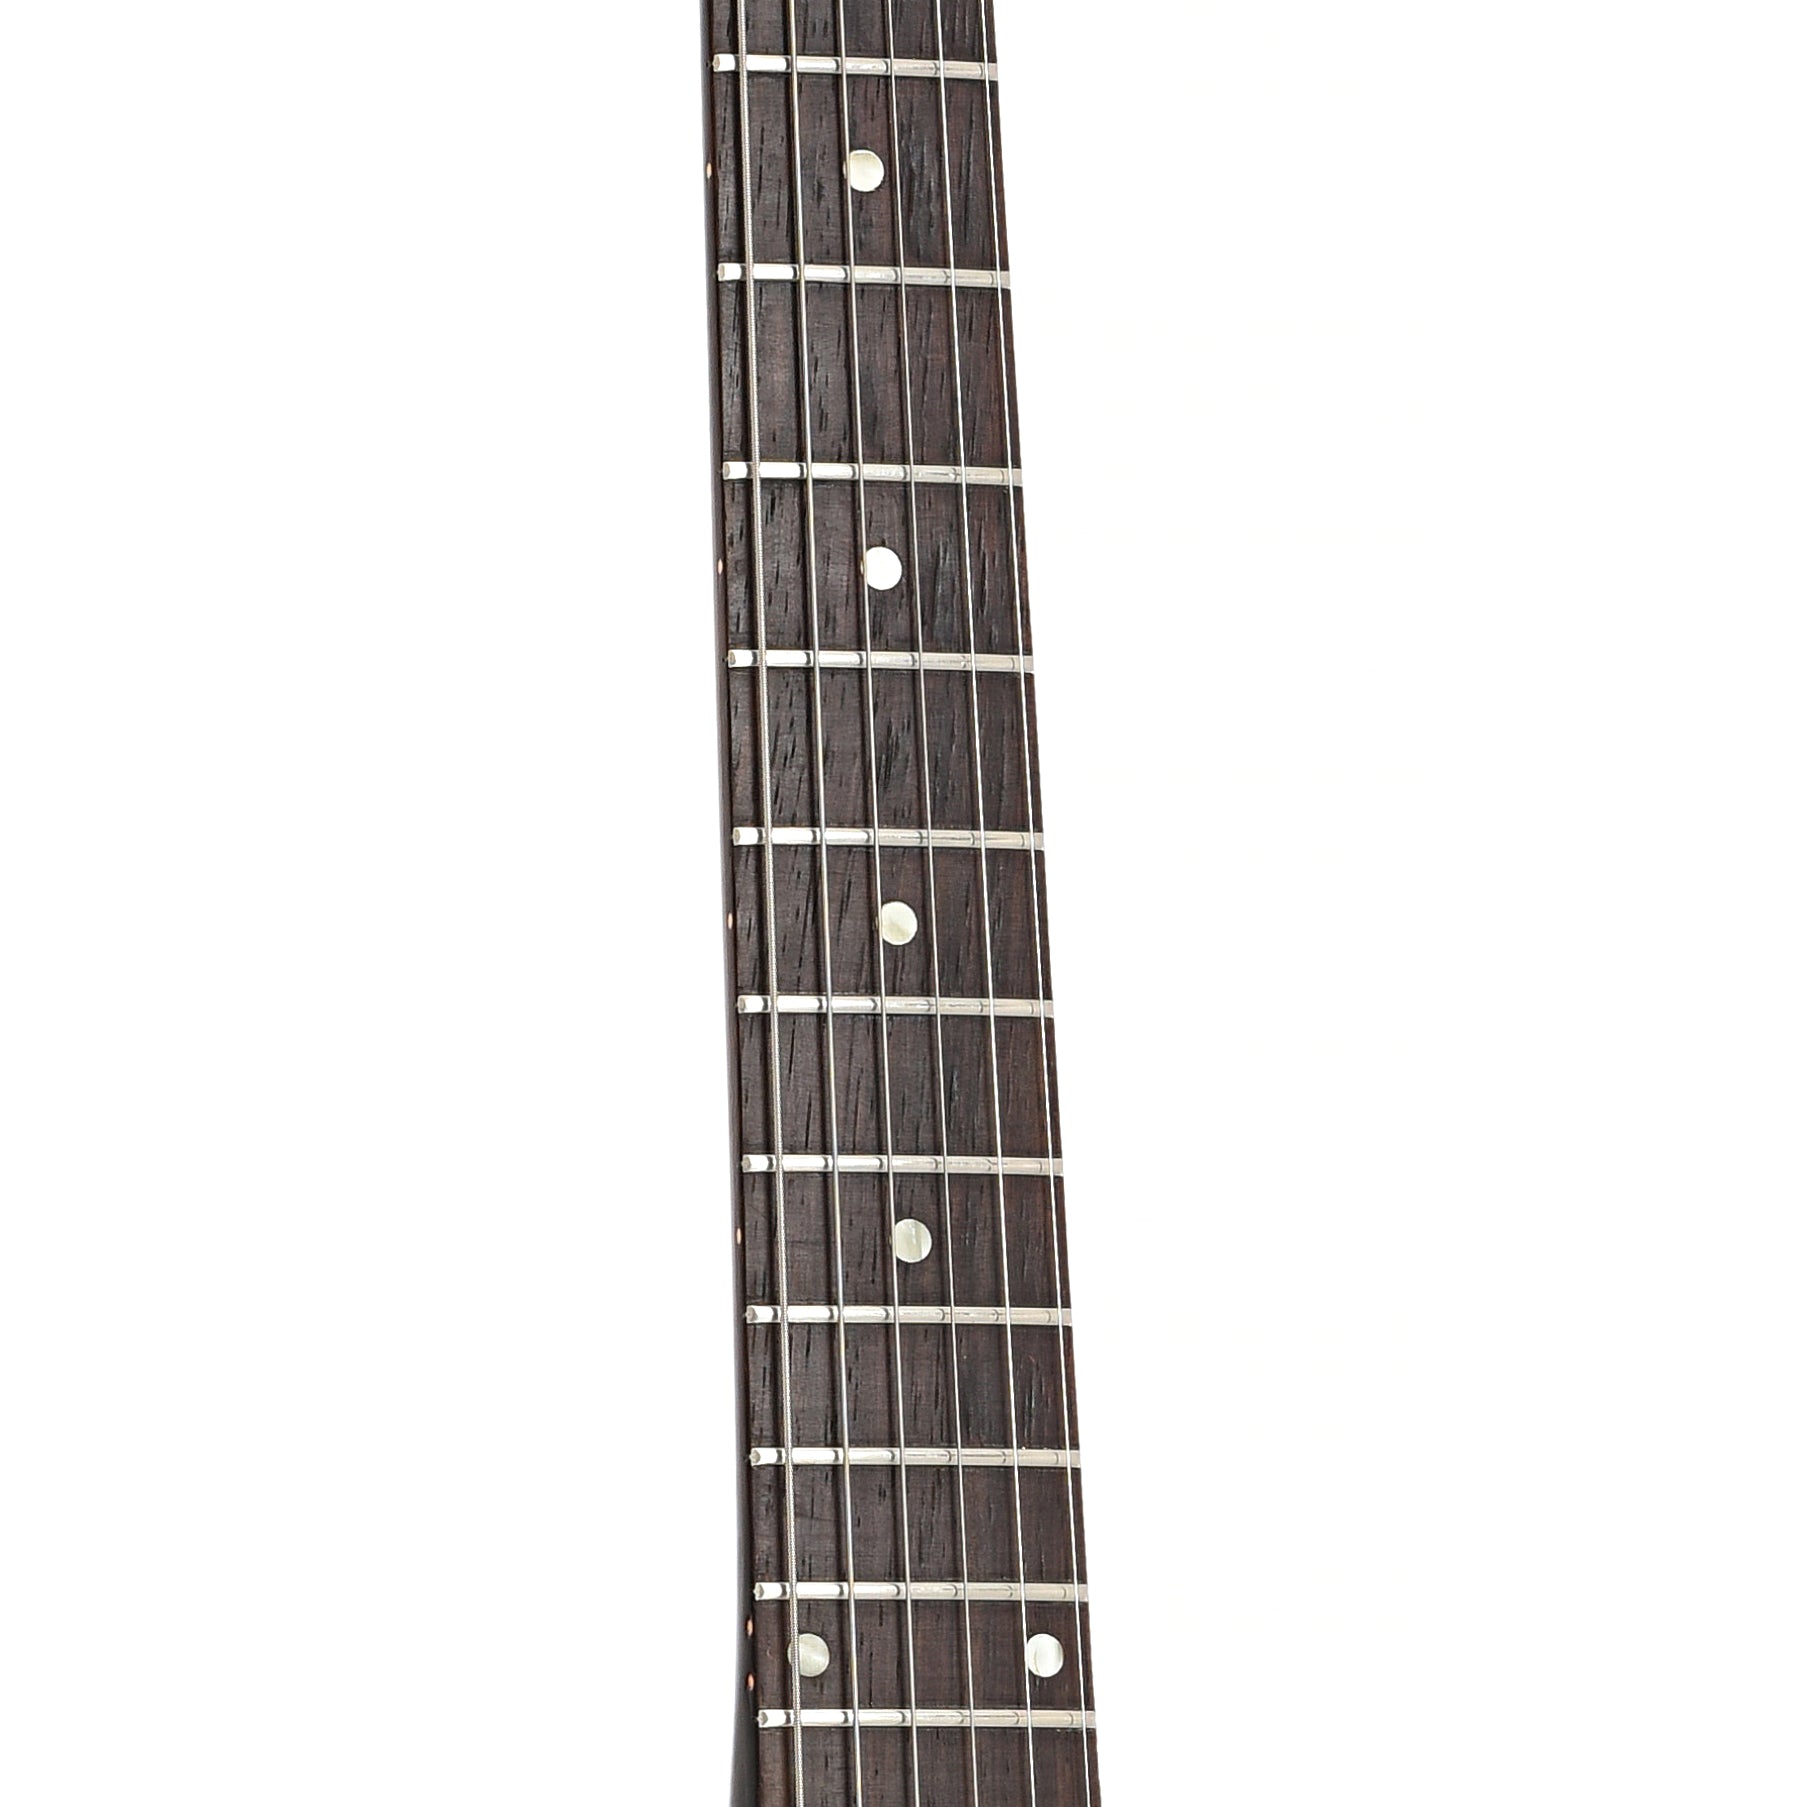 Fretboard of Gibson ES-150 Hollow Body Electric Guitar (1941)